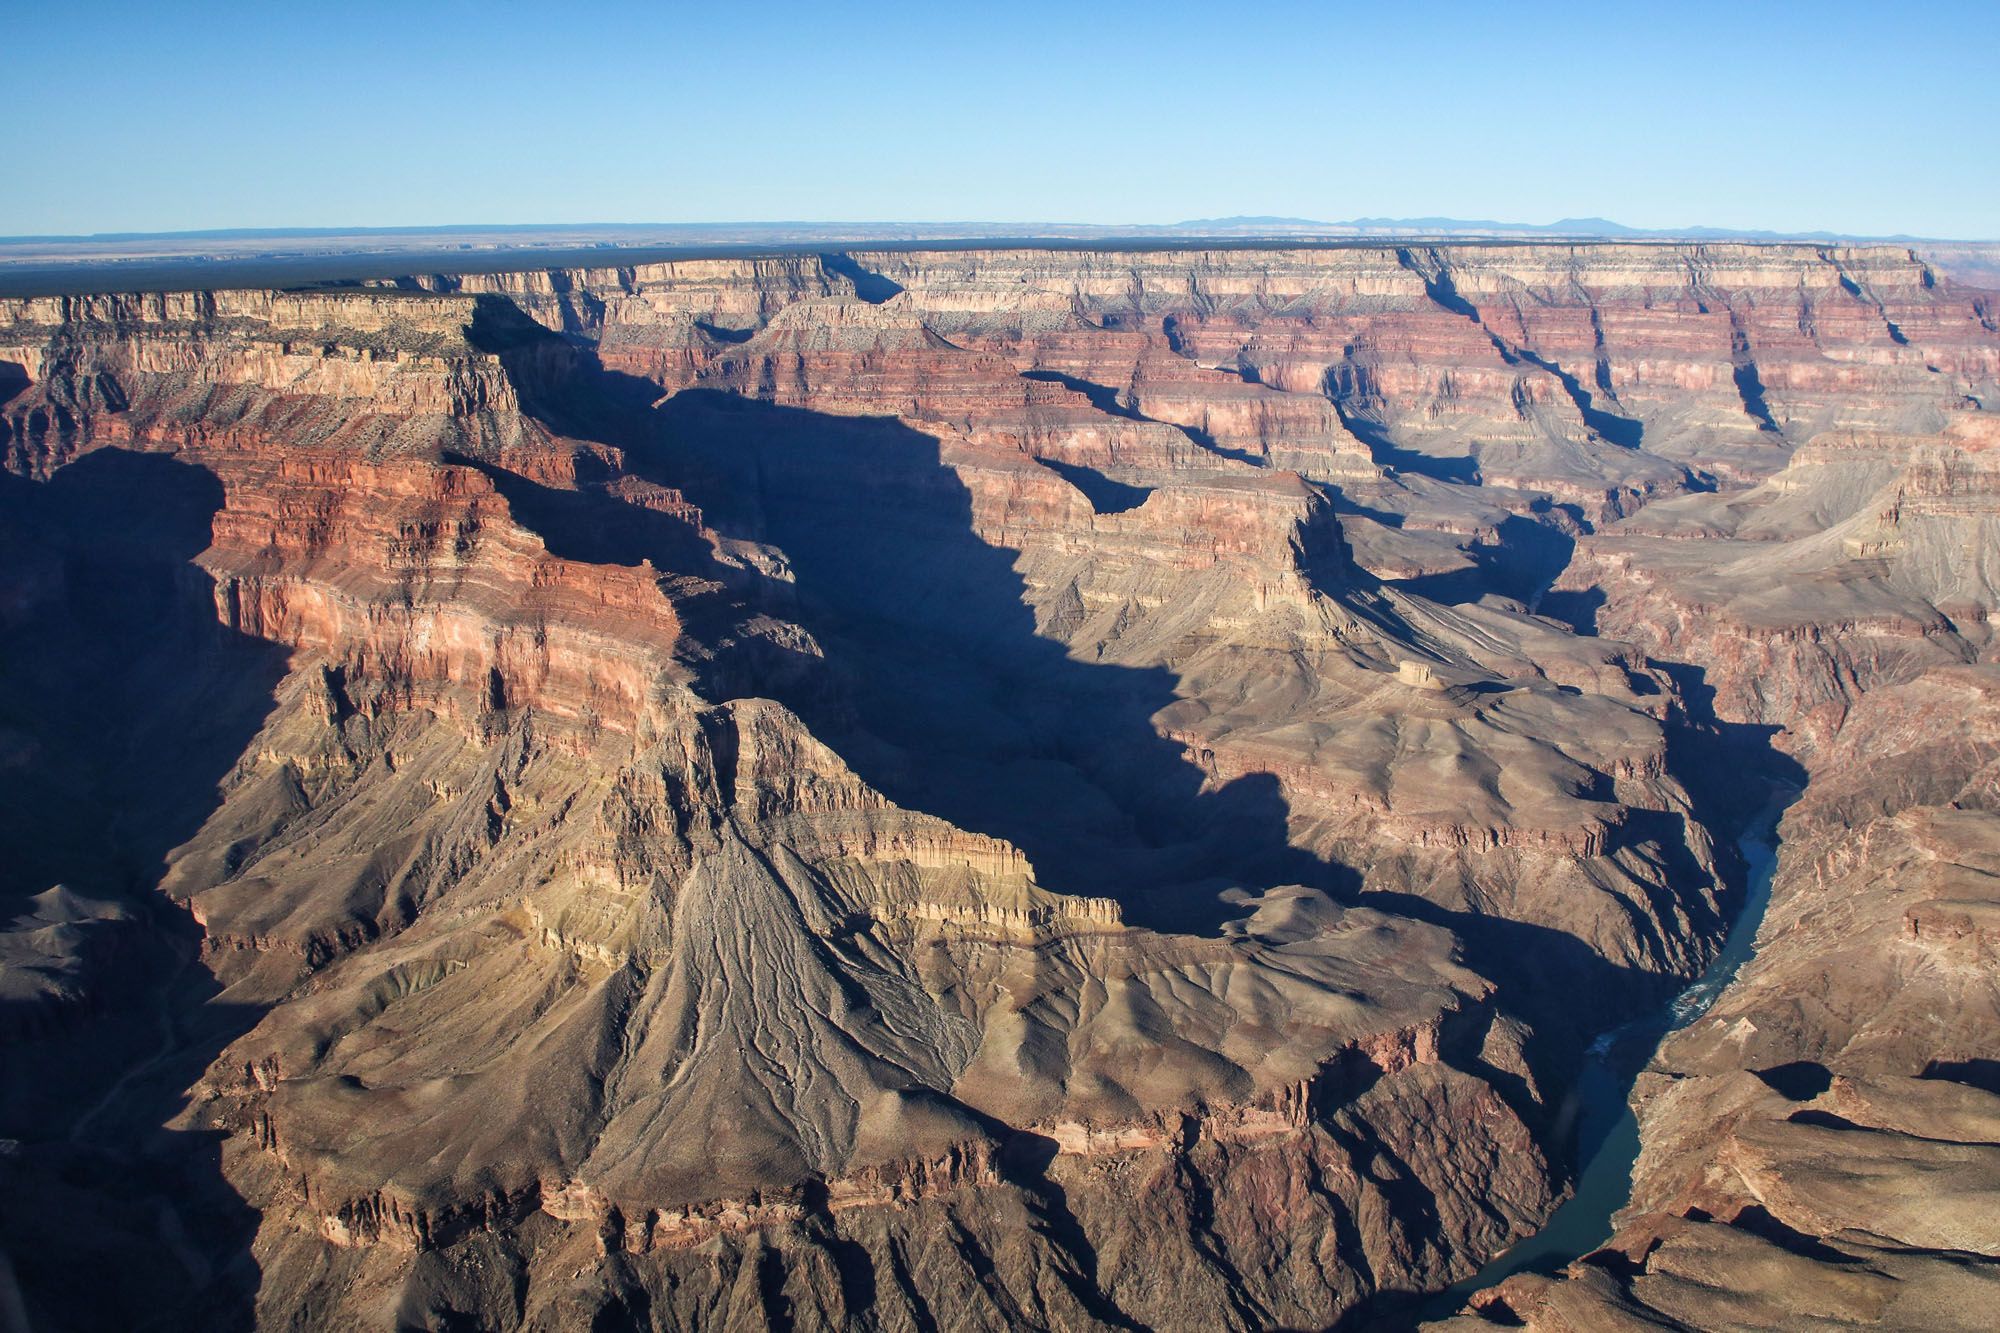 View of the Grand Canyon from a Helicopter